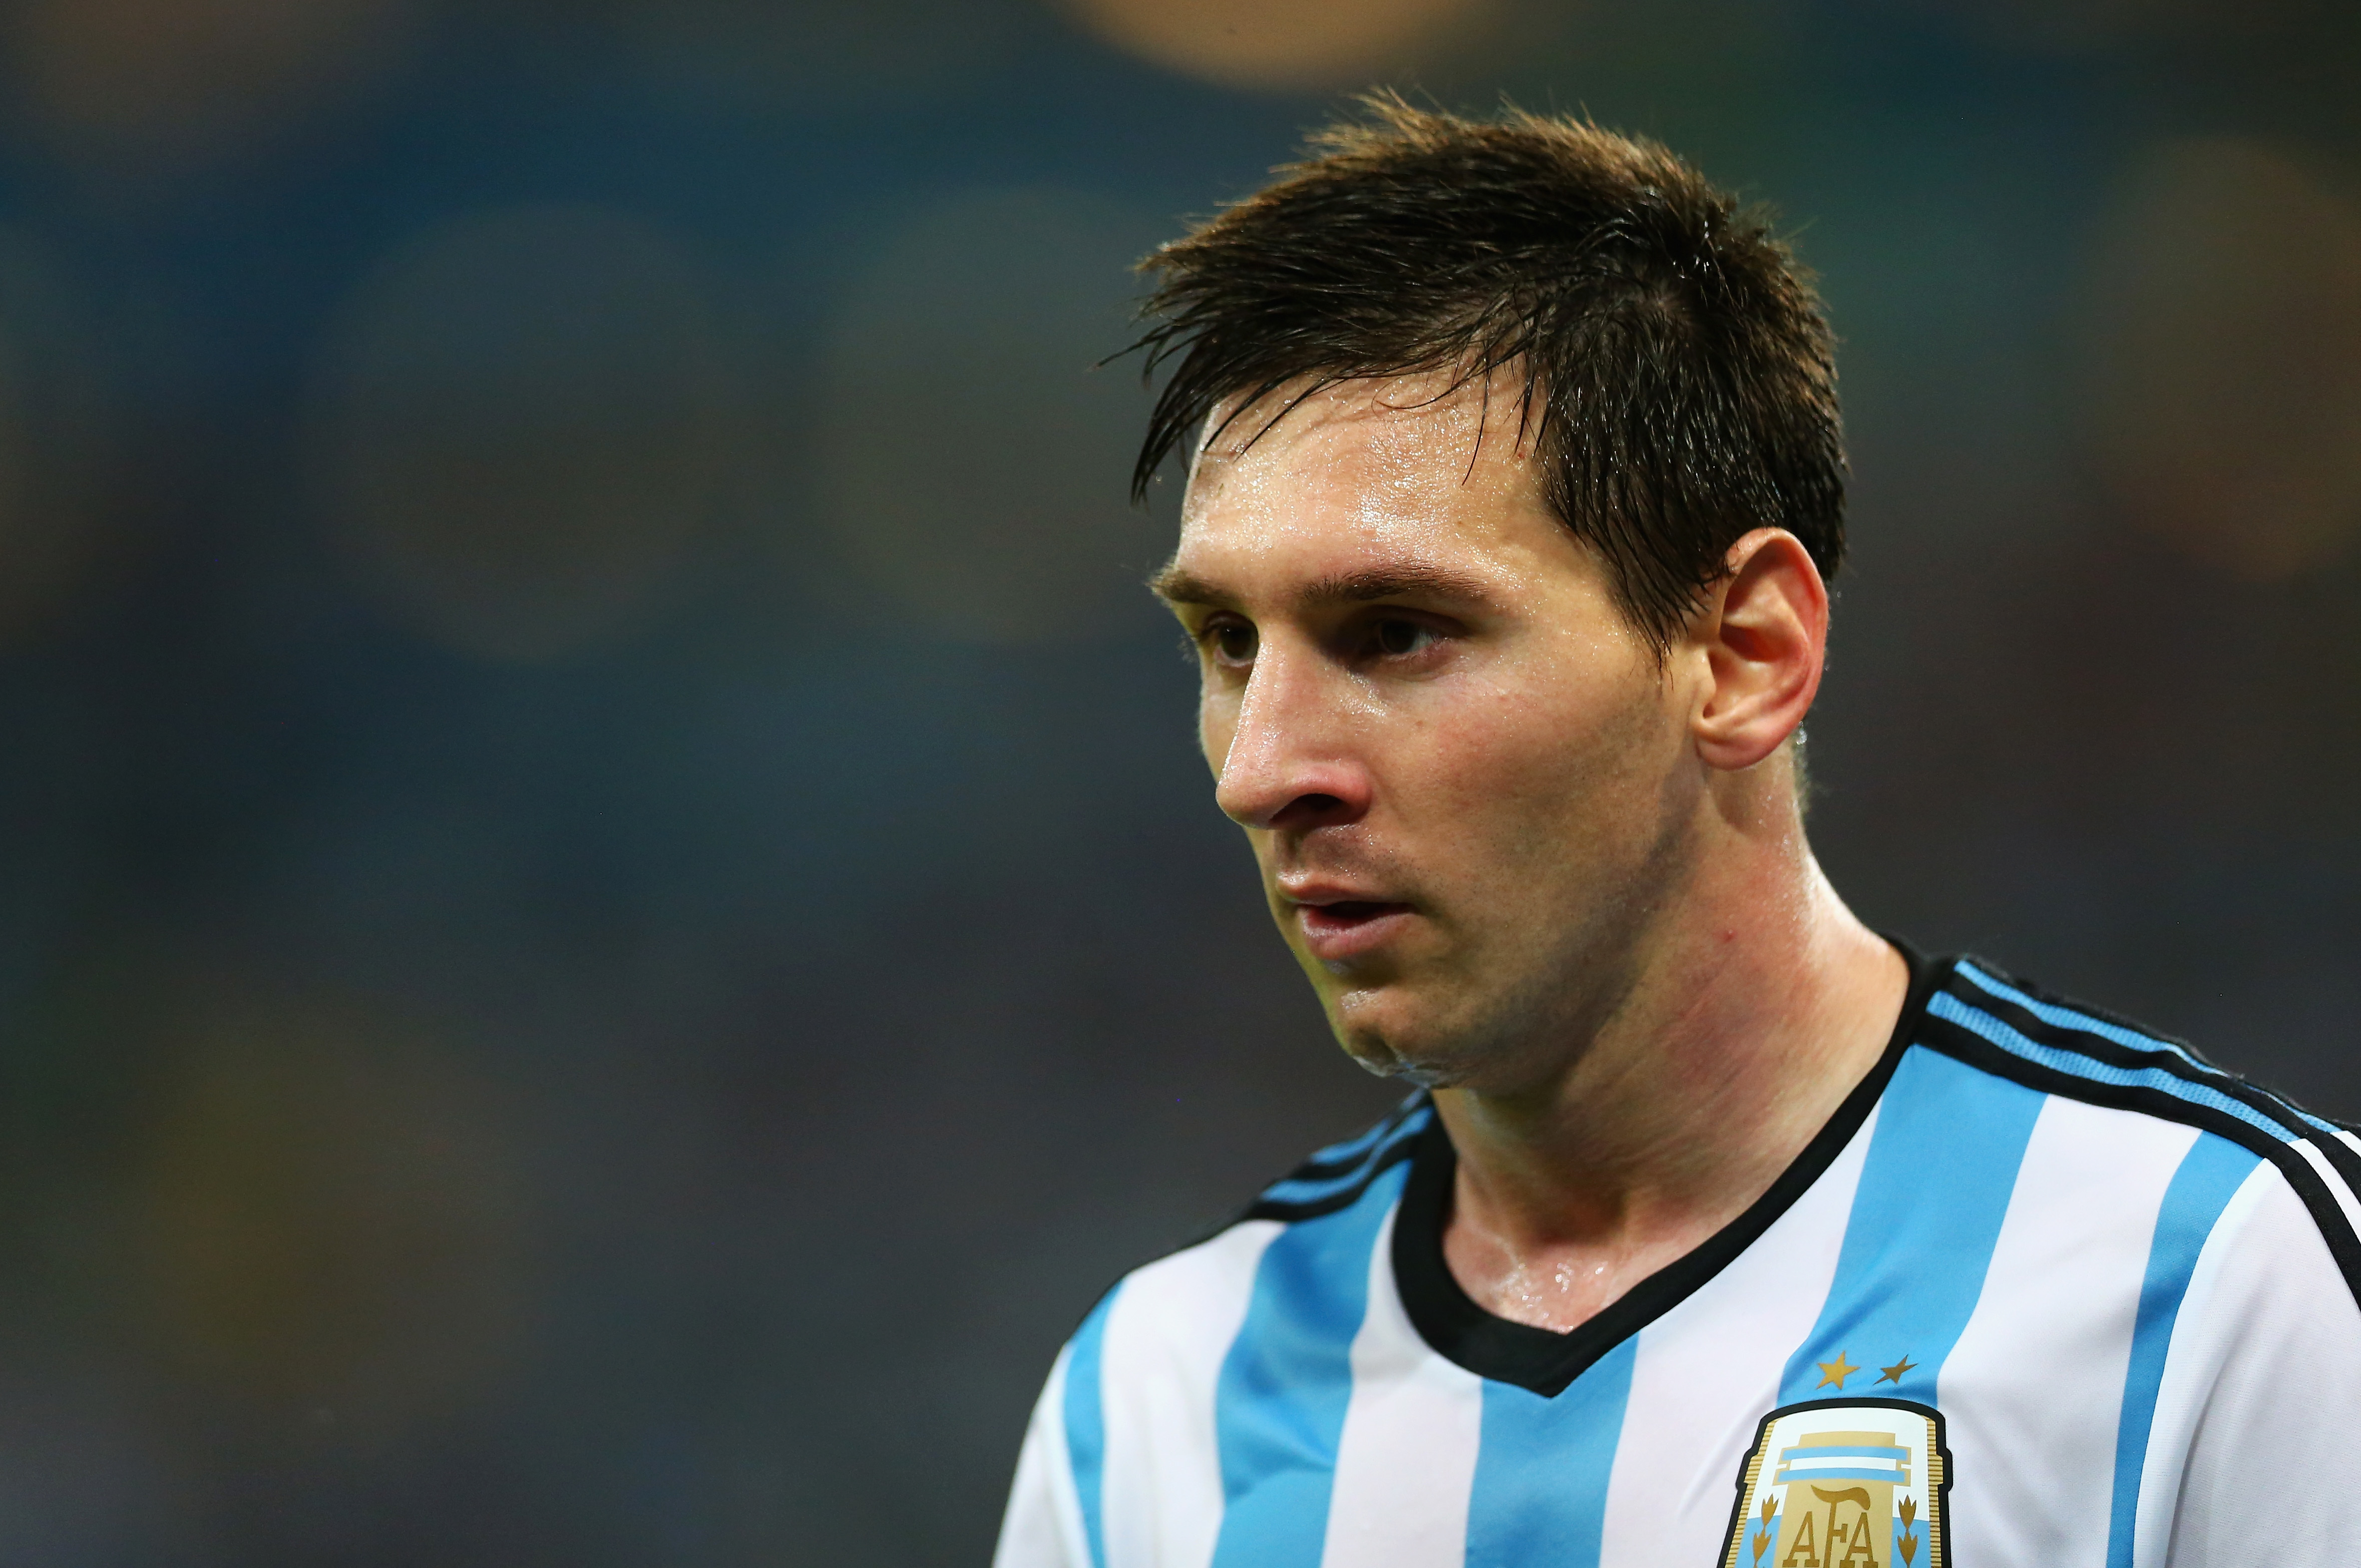 Lionel Messi wallpapers for desktop, download free Lionel Messi pictures  and backgrounds for PC 